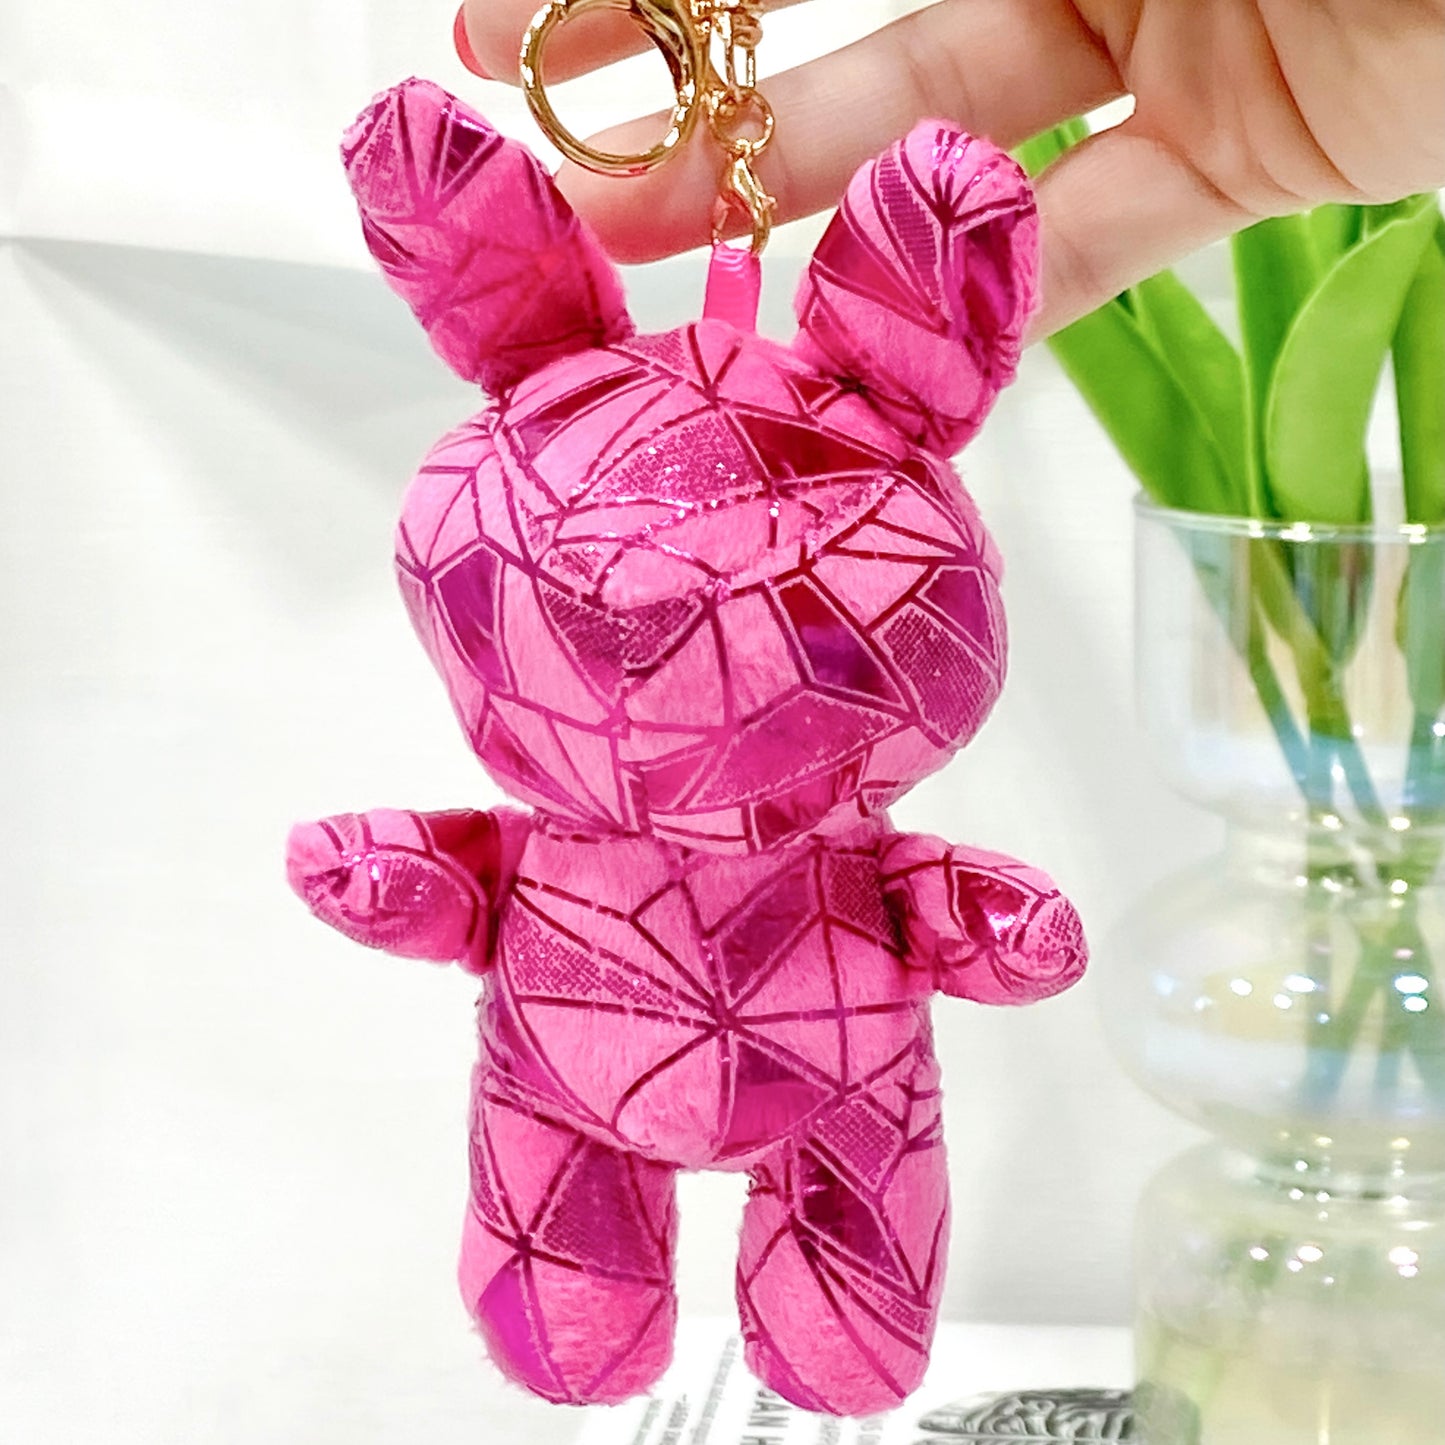 Metallic Bunny Keychains ( 4 Colors Available )